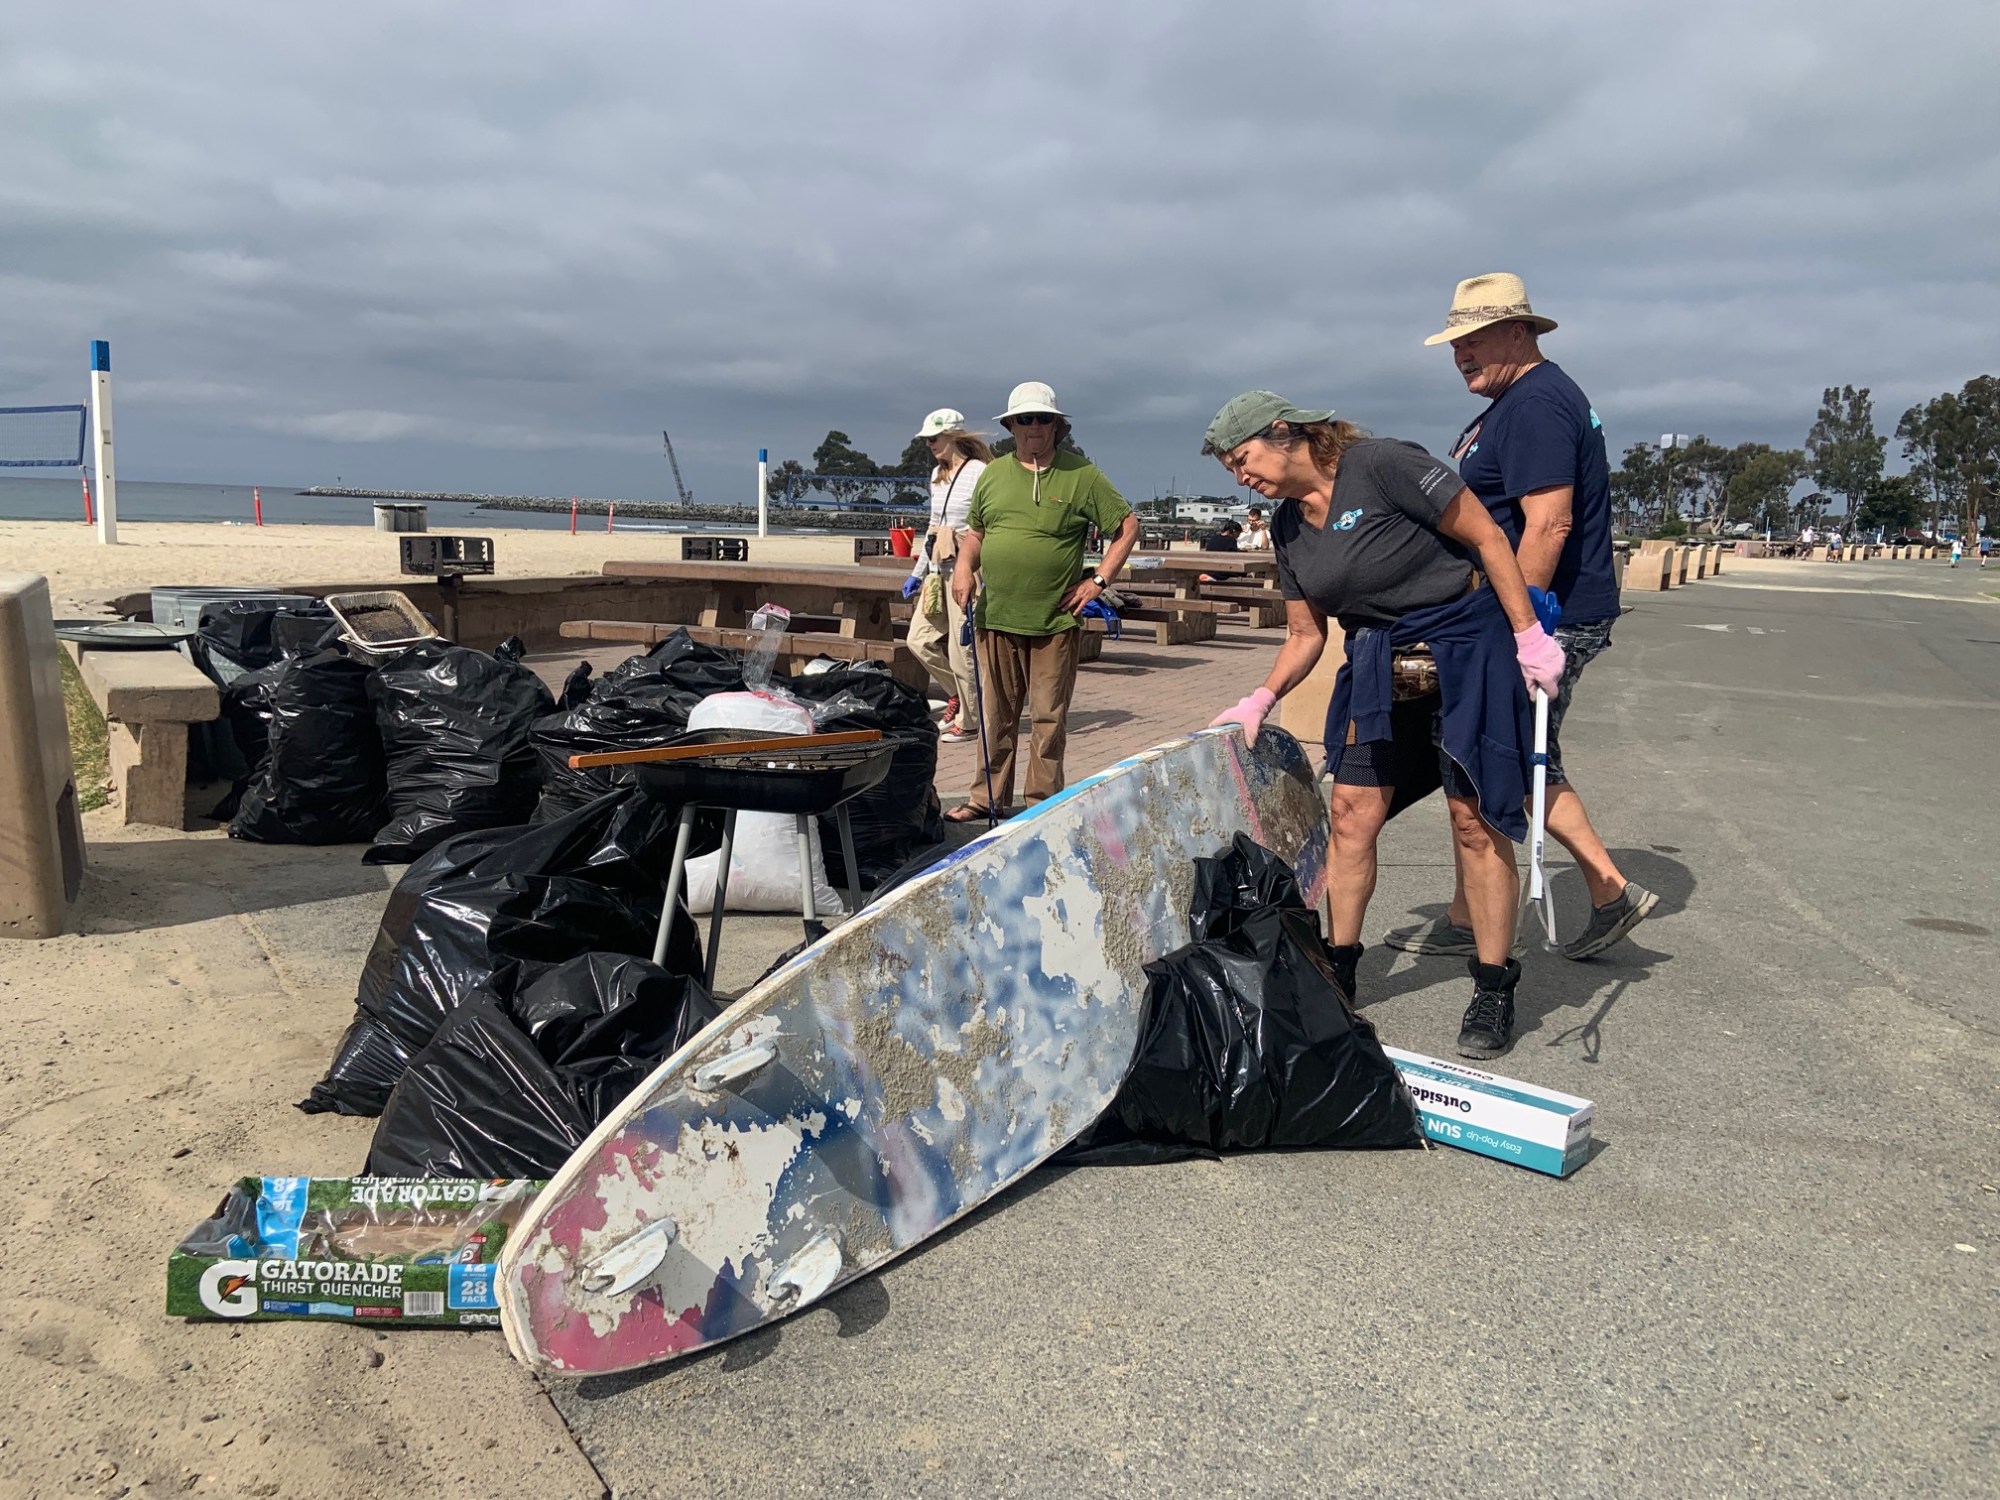 Volunteers with the Doheny Longboard Surfing Association help haul away trash left behind by Fourth of July revelers on July 5, 2022 at Doheny State Beach in Dana Point. (Photo by Laylan Connelly/SCNG)